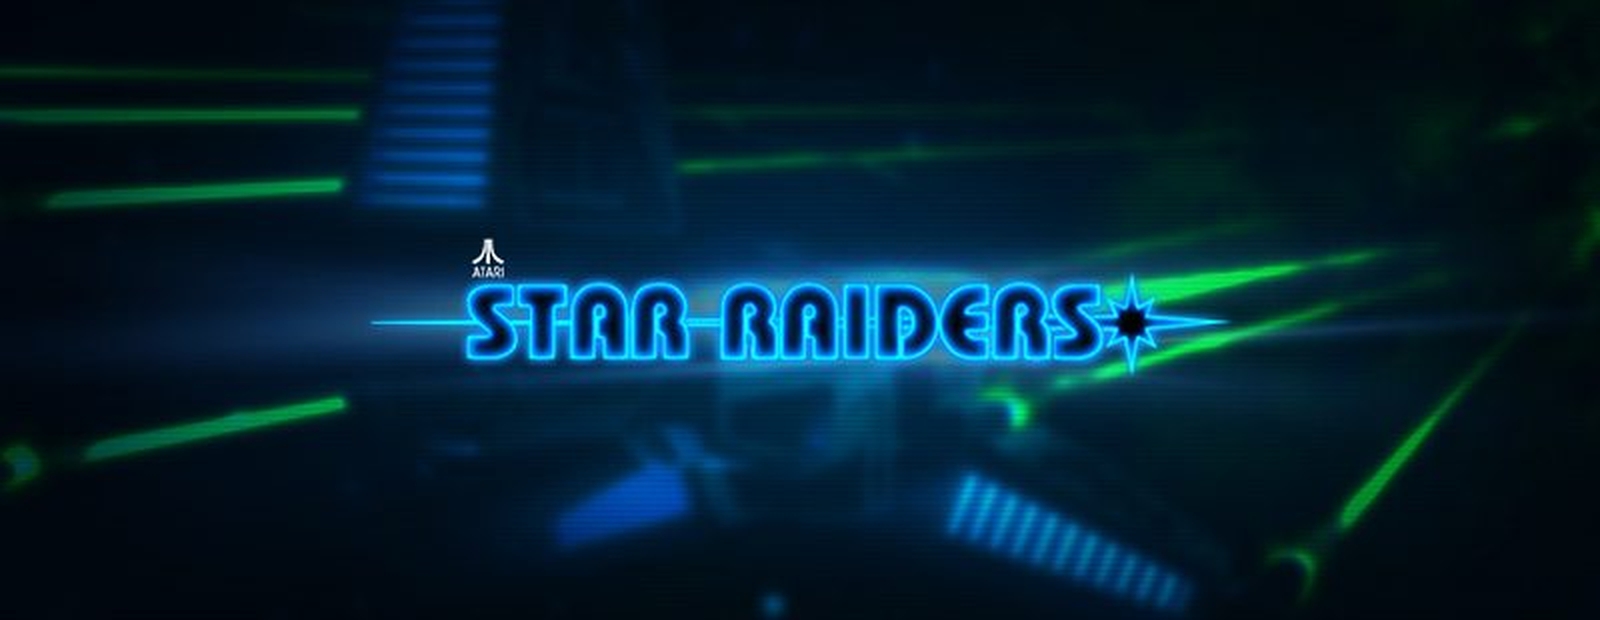 The Star Raiders Online Slot Demo Game by PariPlay